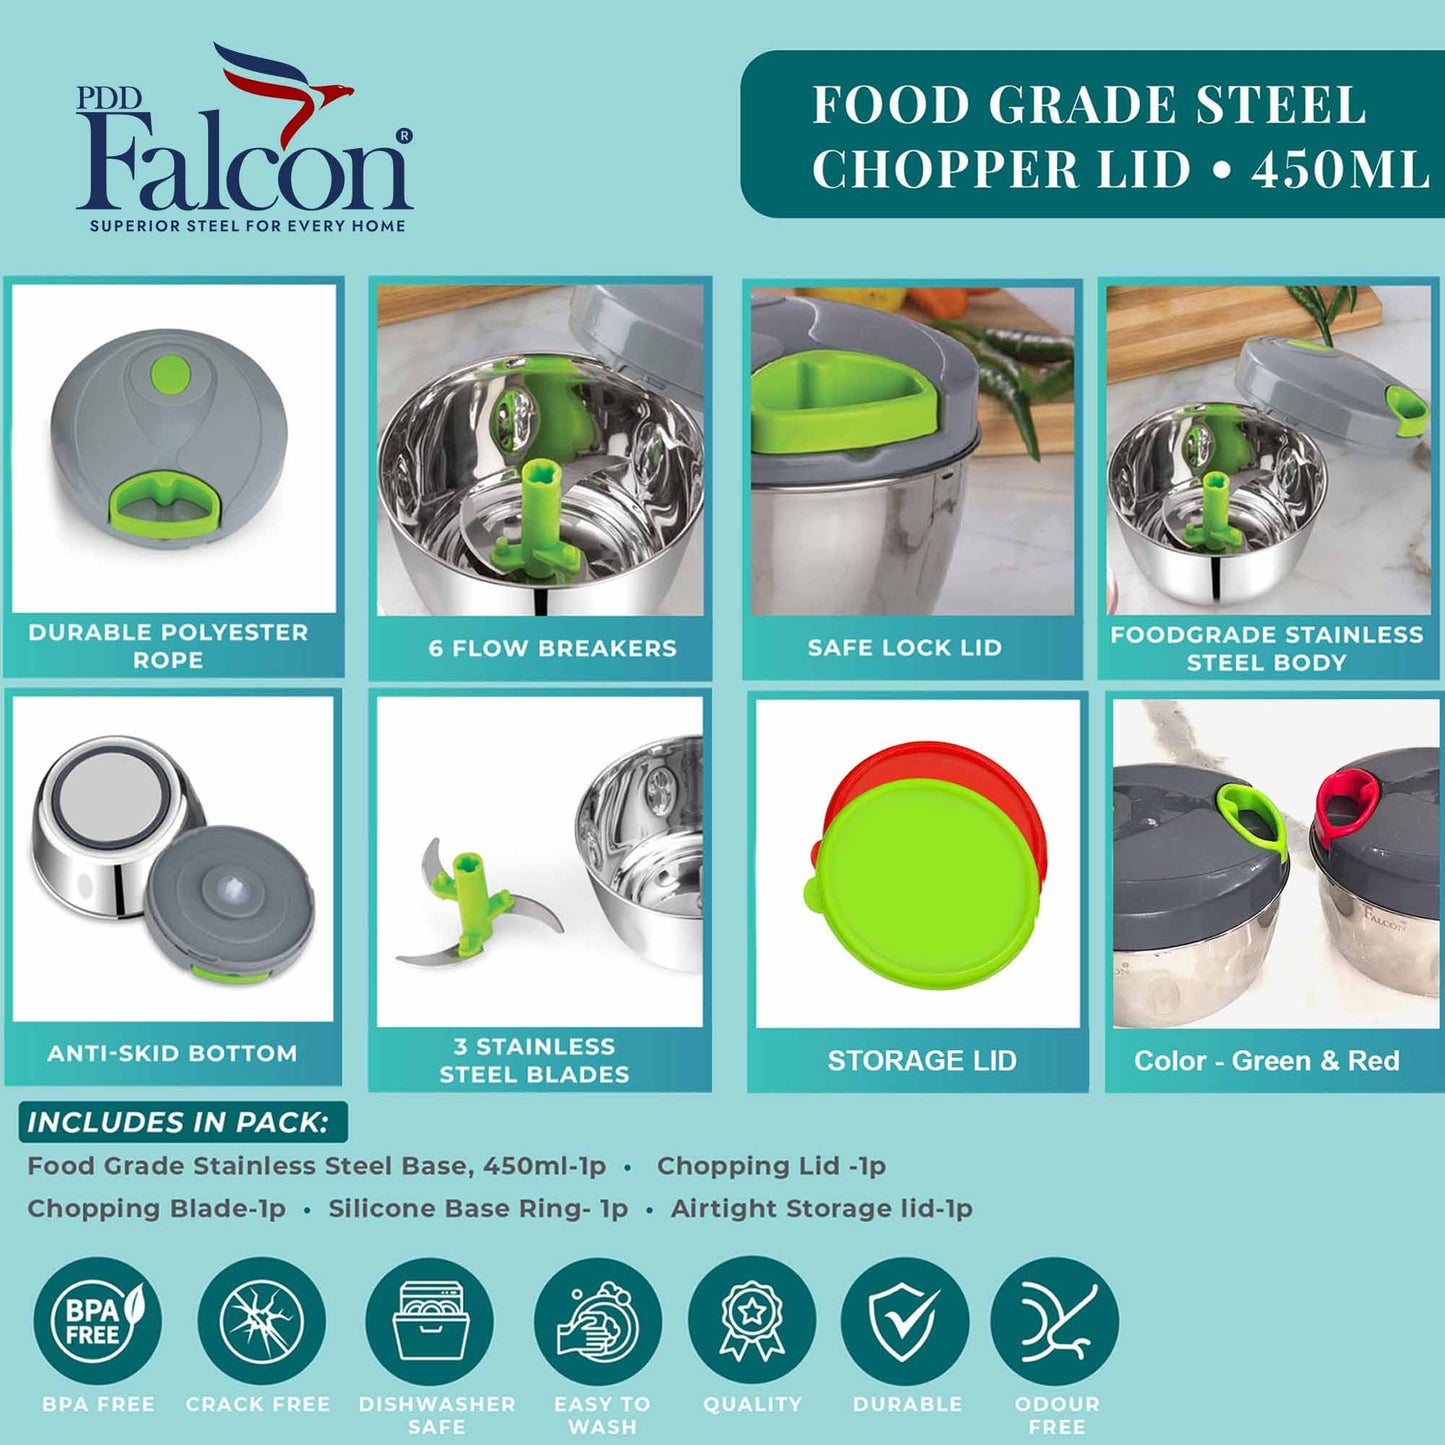 PddFalcon Stainless Steel Chopper with storage lid, Red - 450ml